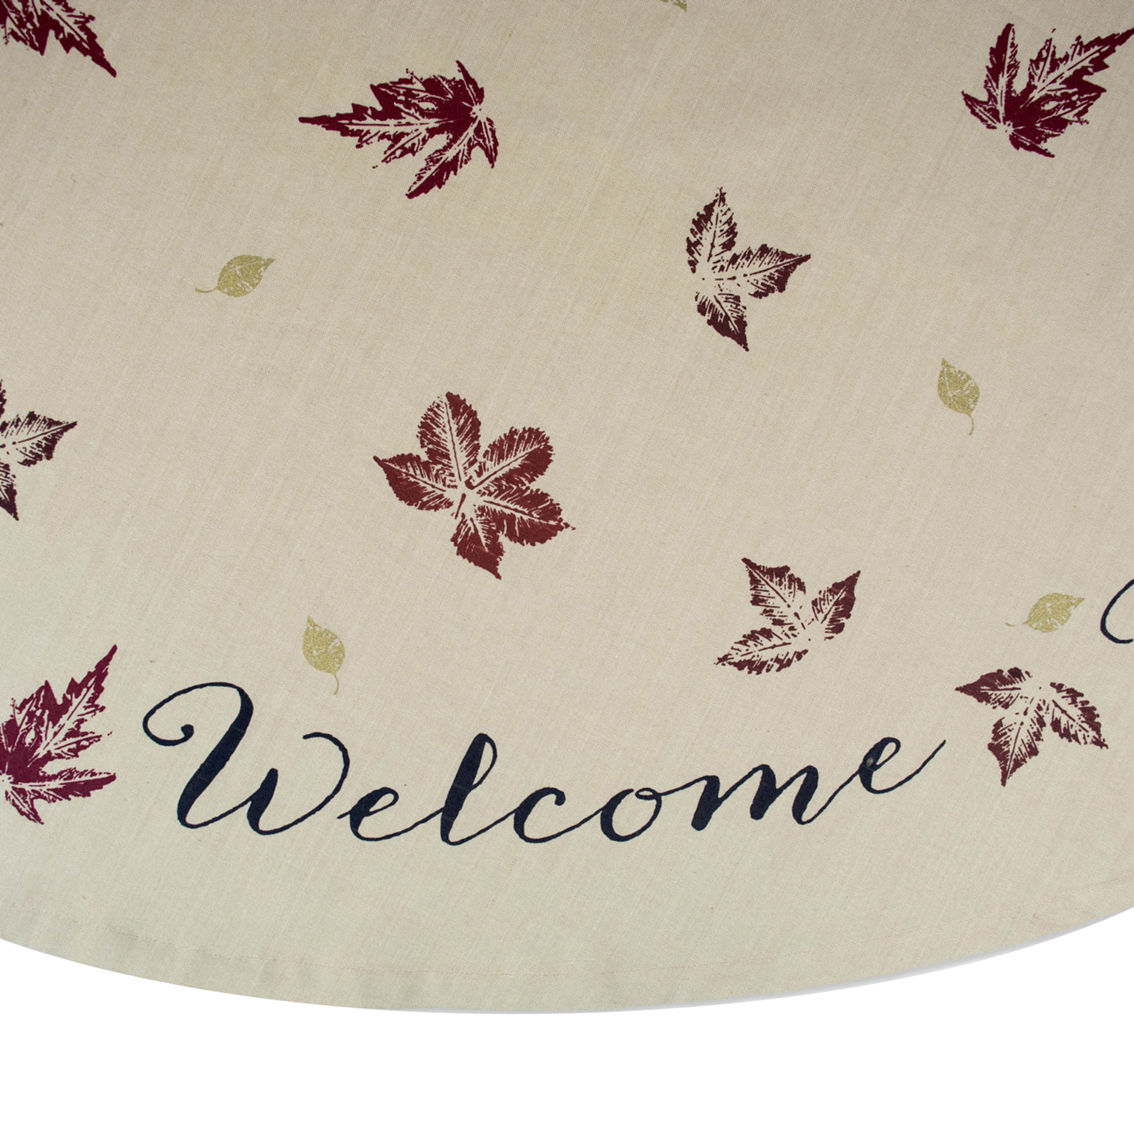 Design Imports 70 in. Round Rustic Leaves Print Tablecloth - Image 4 of 7